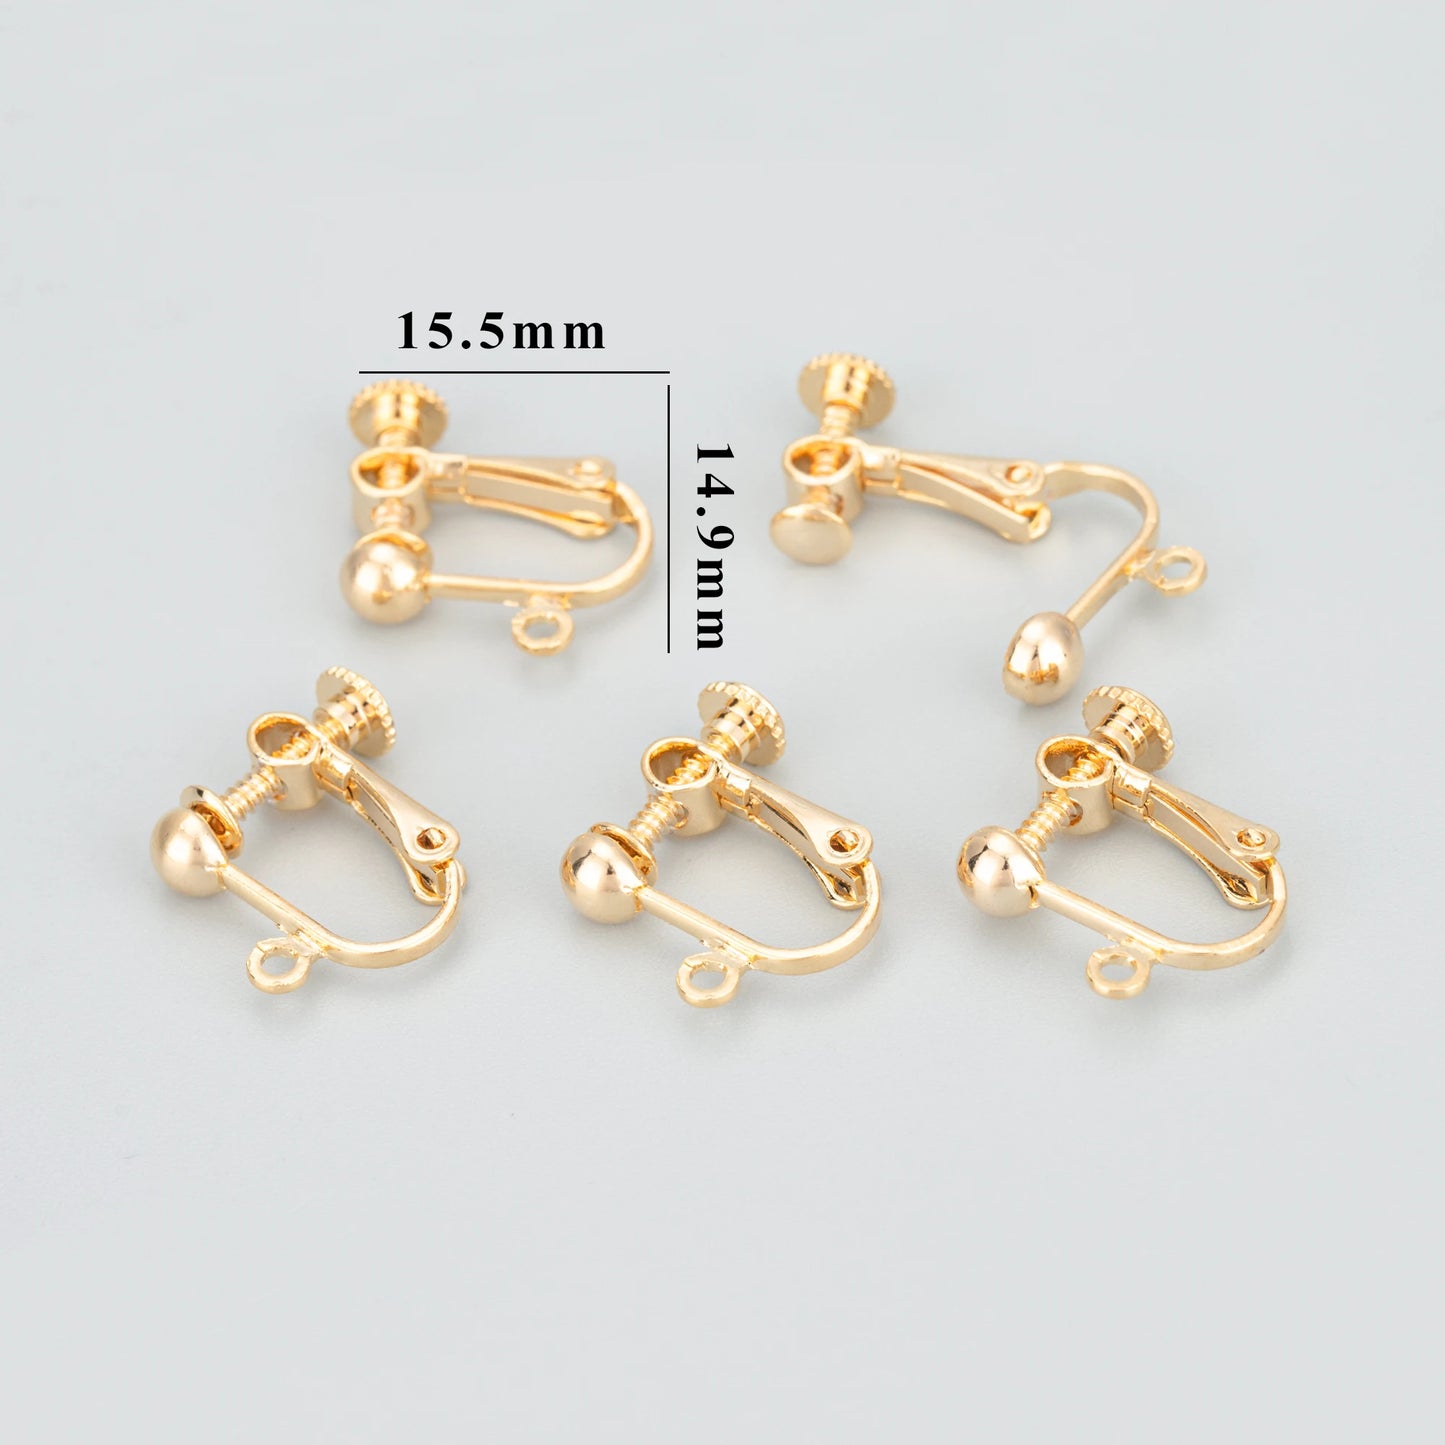 GUFEATHER MB74,jewelry accessories,nickel free,18k gold plated,copper,clasp,earrings for women,ear clip,jewelry making,10pcs/lot